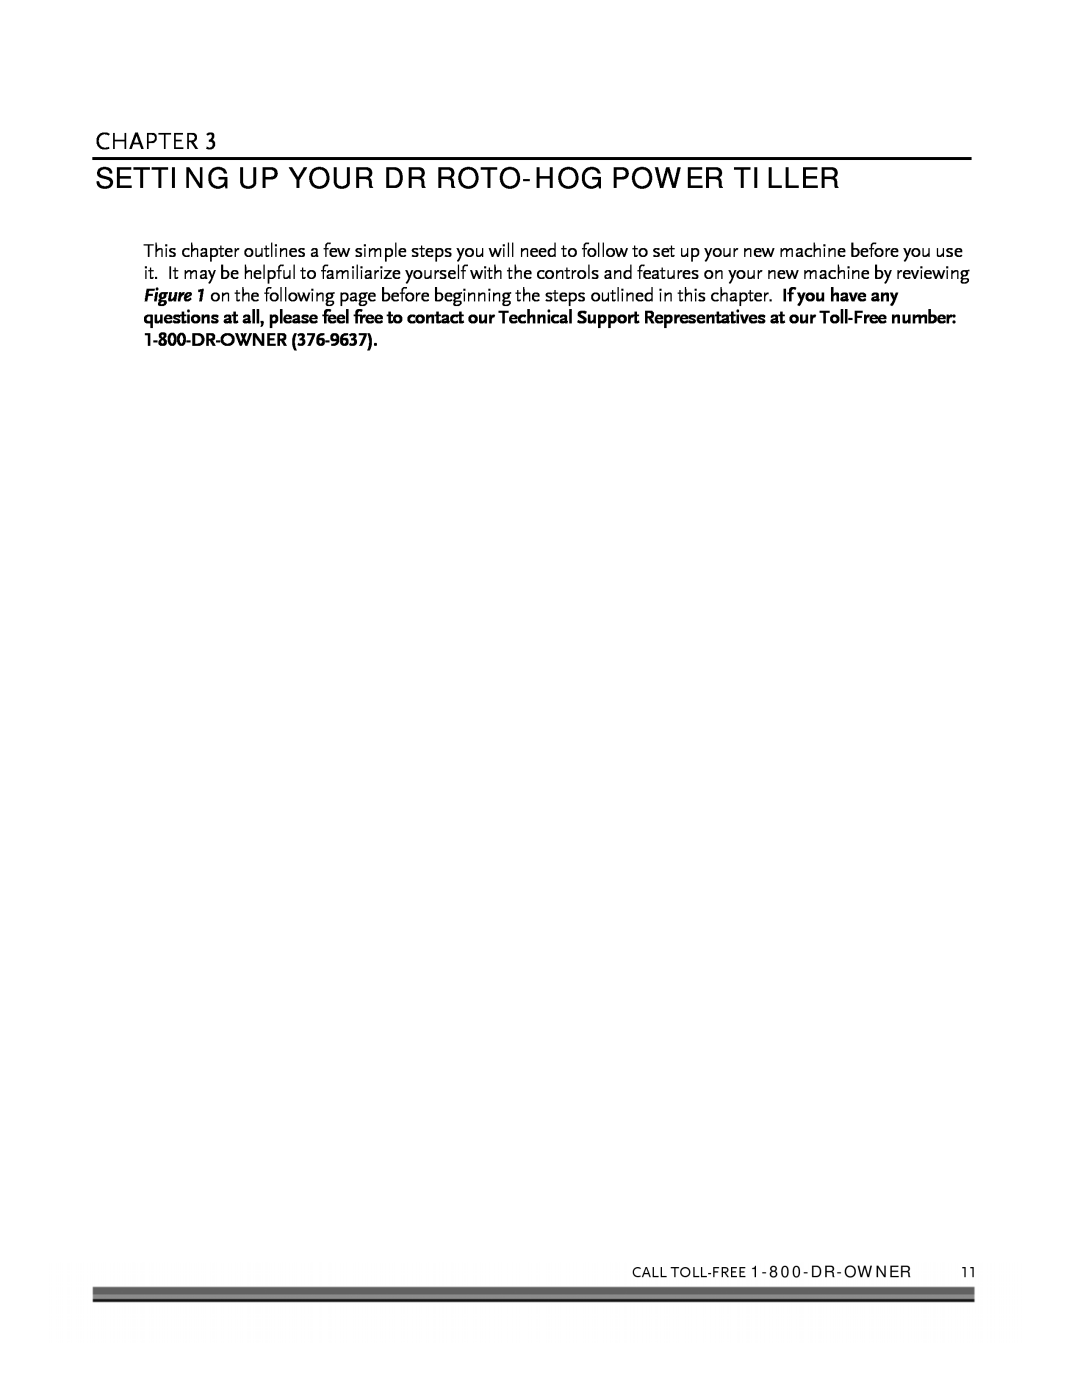 Country Home Products ROTO-HOGTM manual Setting Up Your Dr Roto-Hogpower Tiller, Chapter, Dr-Owner 